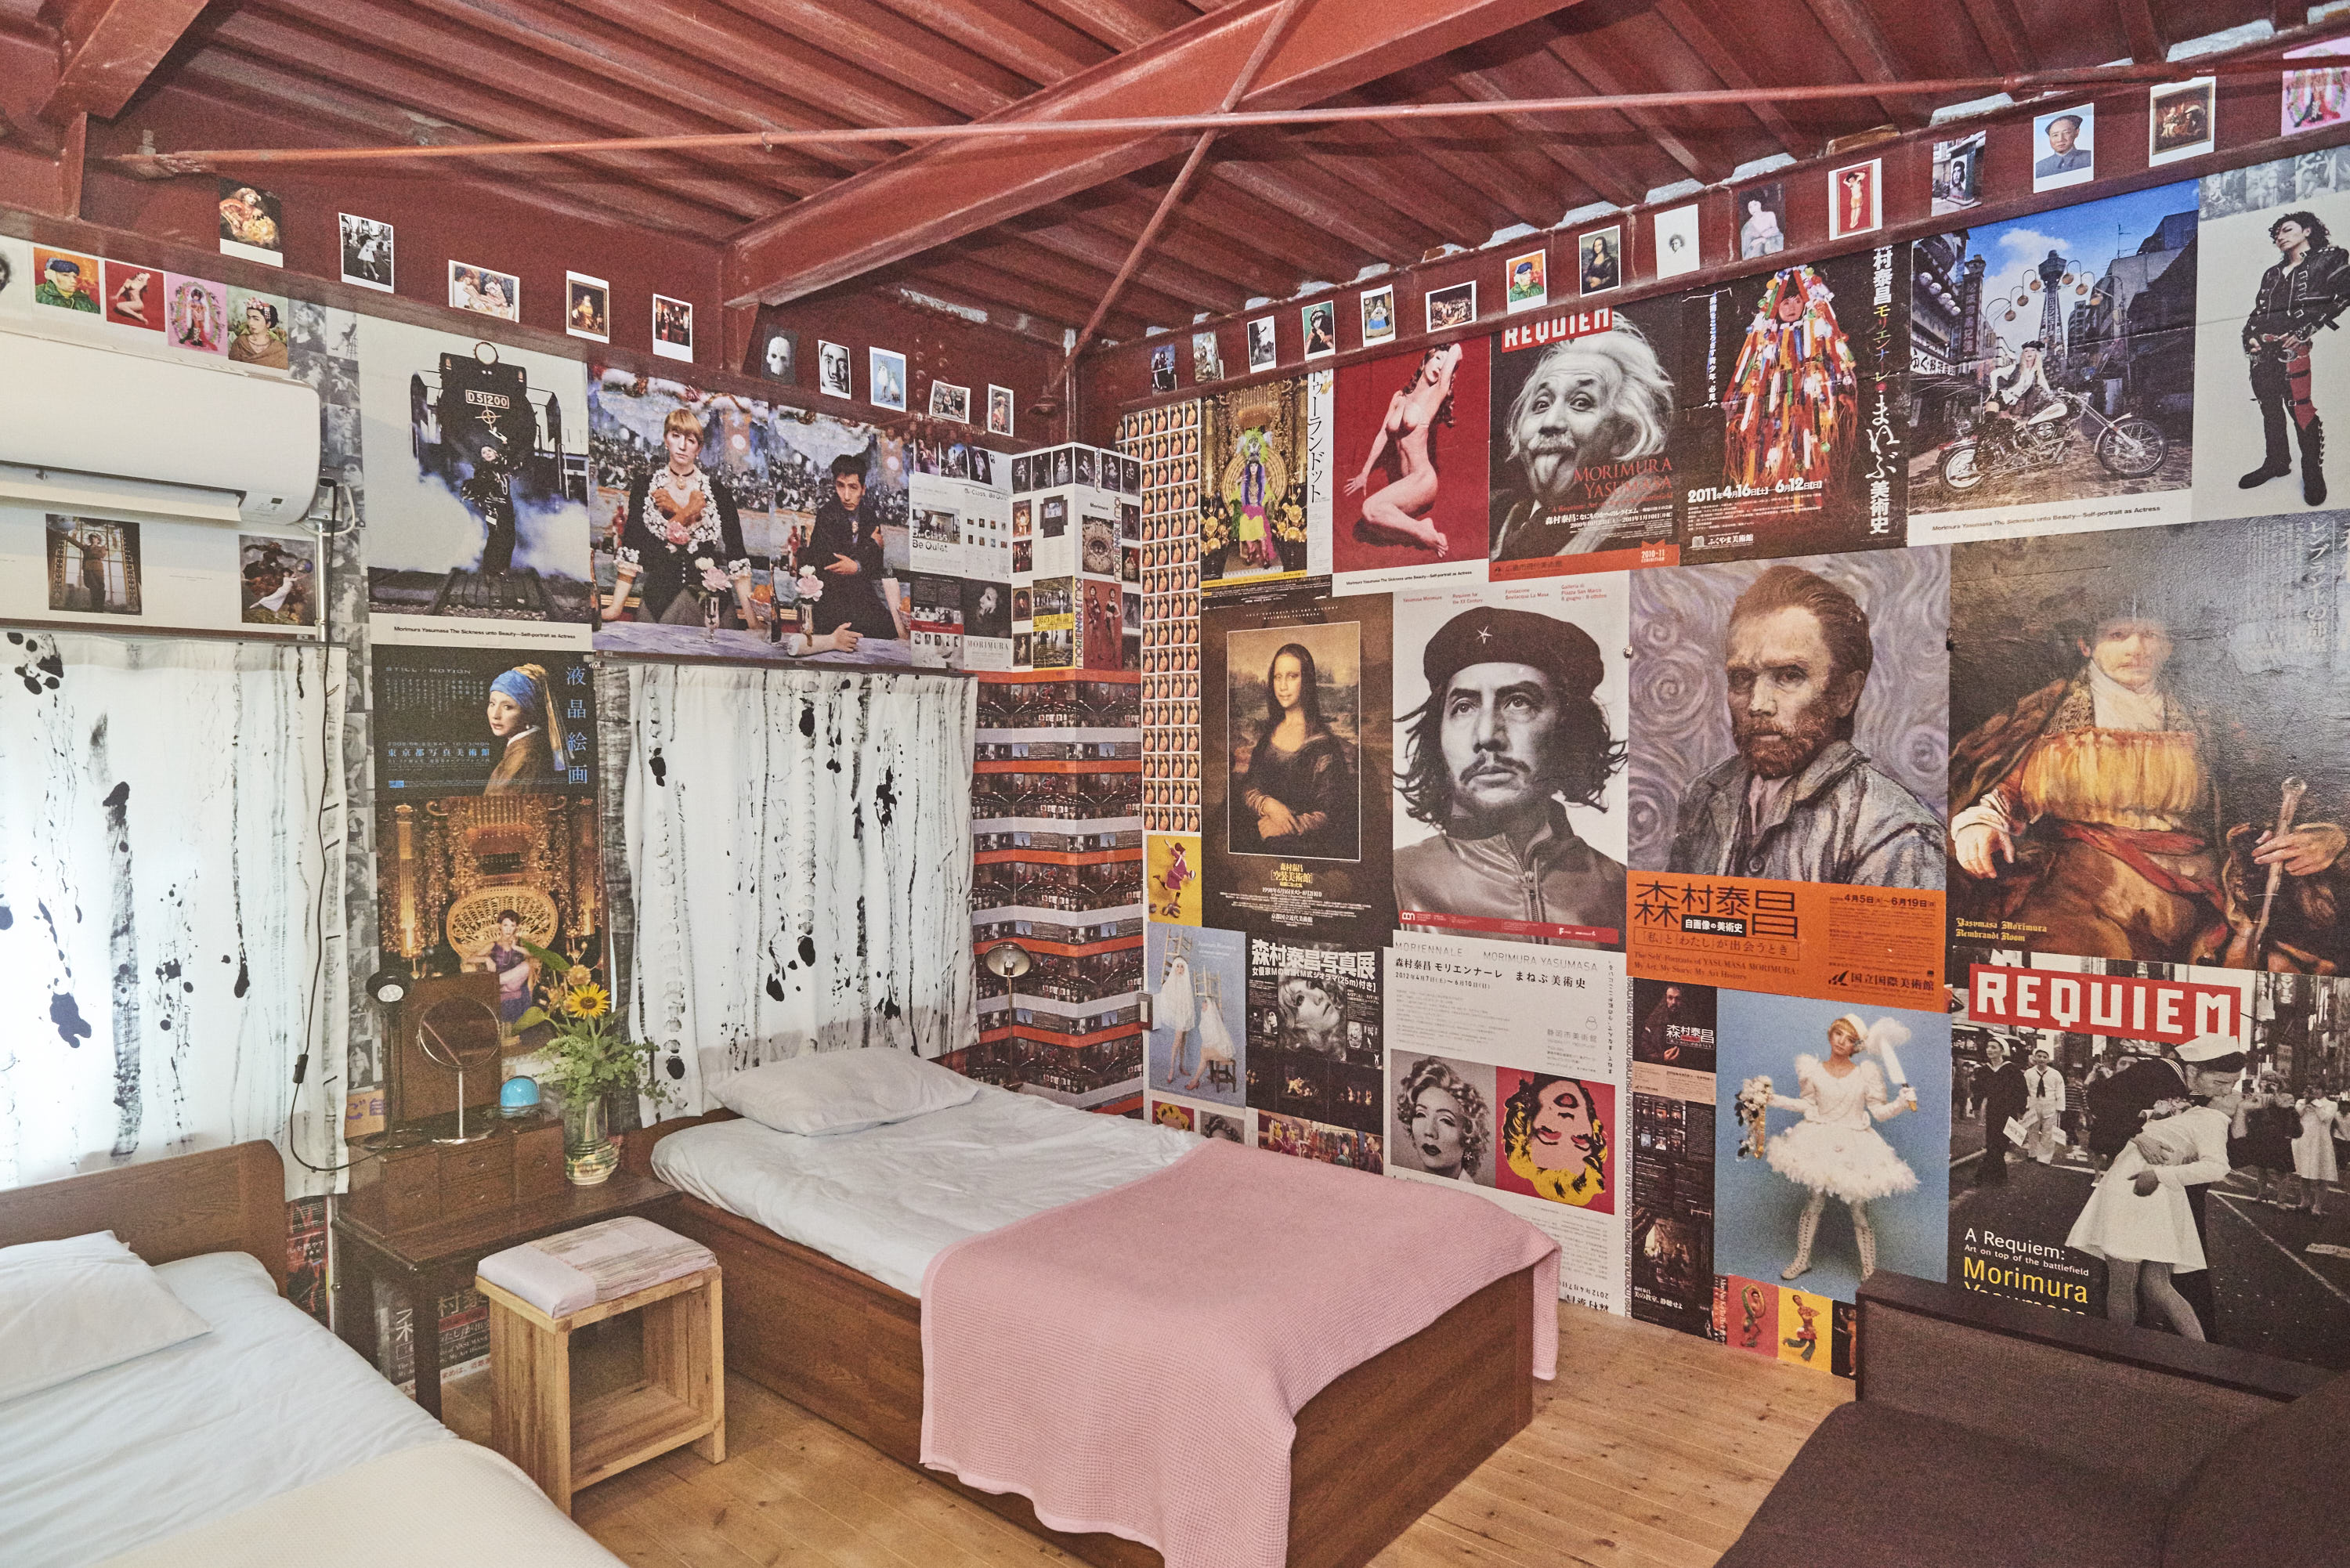 [Figure 6: A room in the Guesthouse that was a collaborative work by Morimura Yasumasa and local workers]